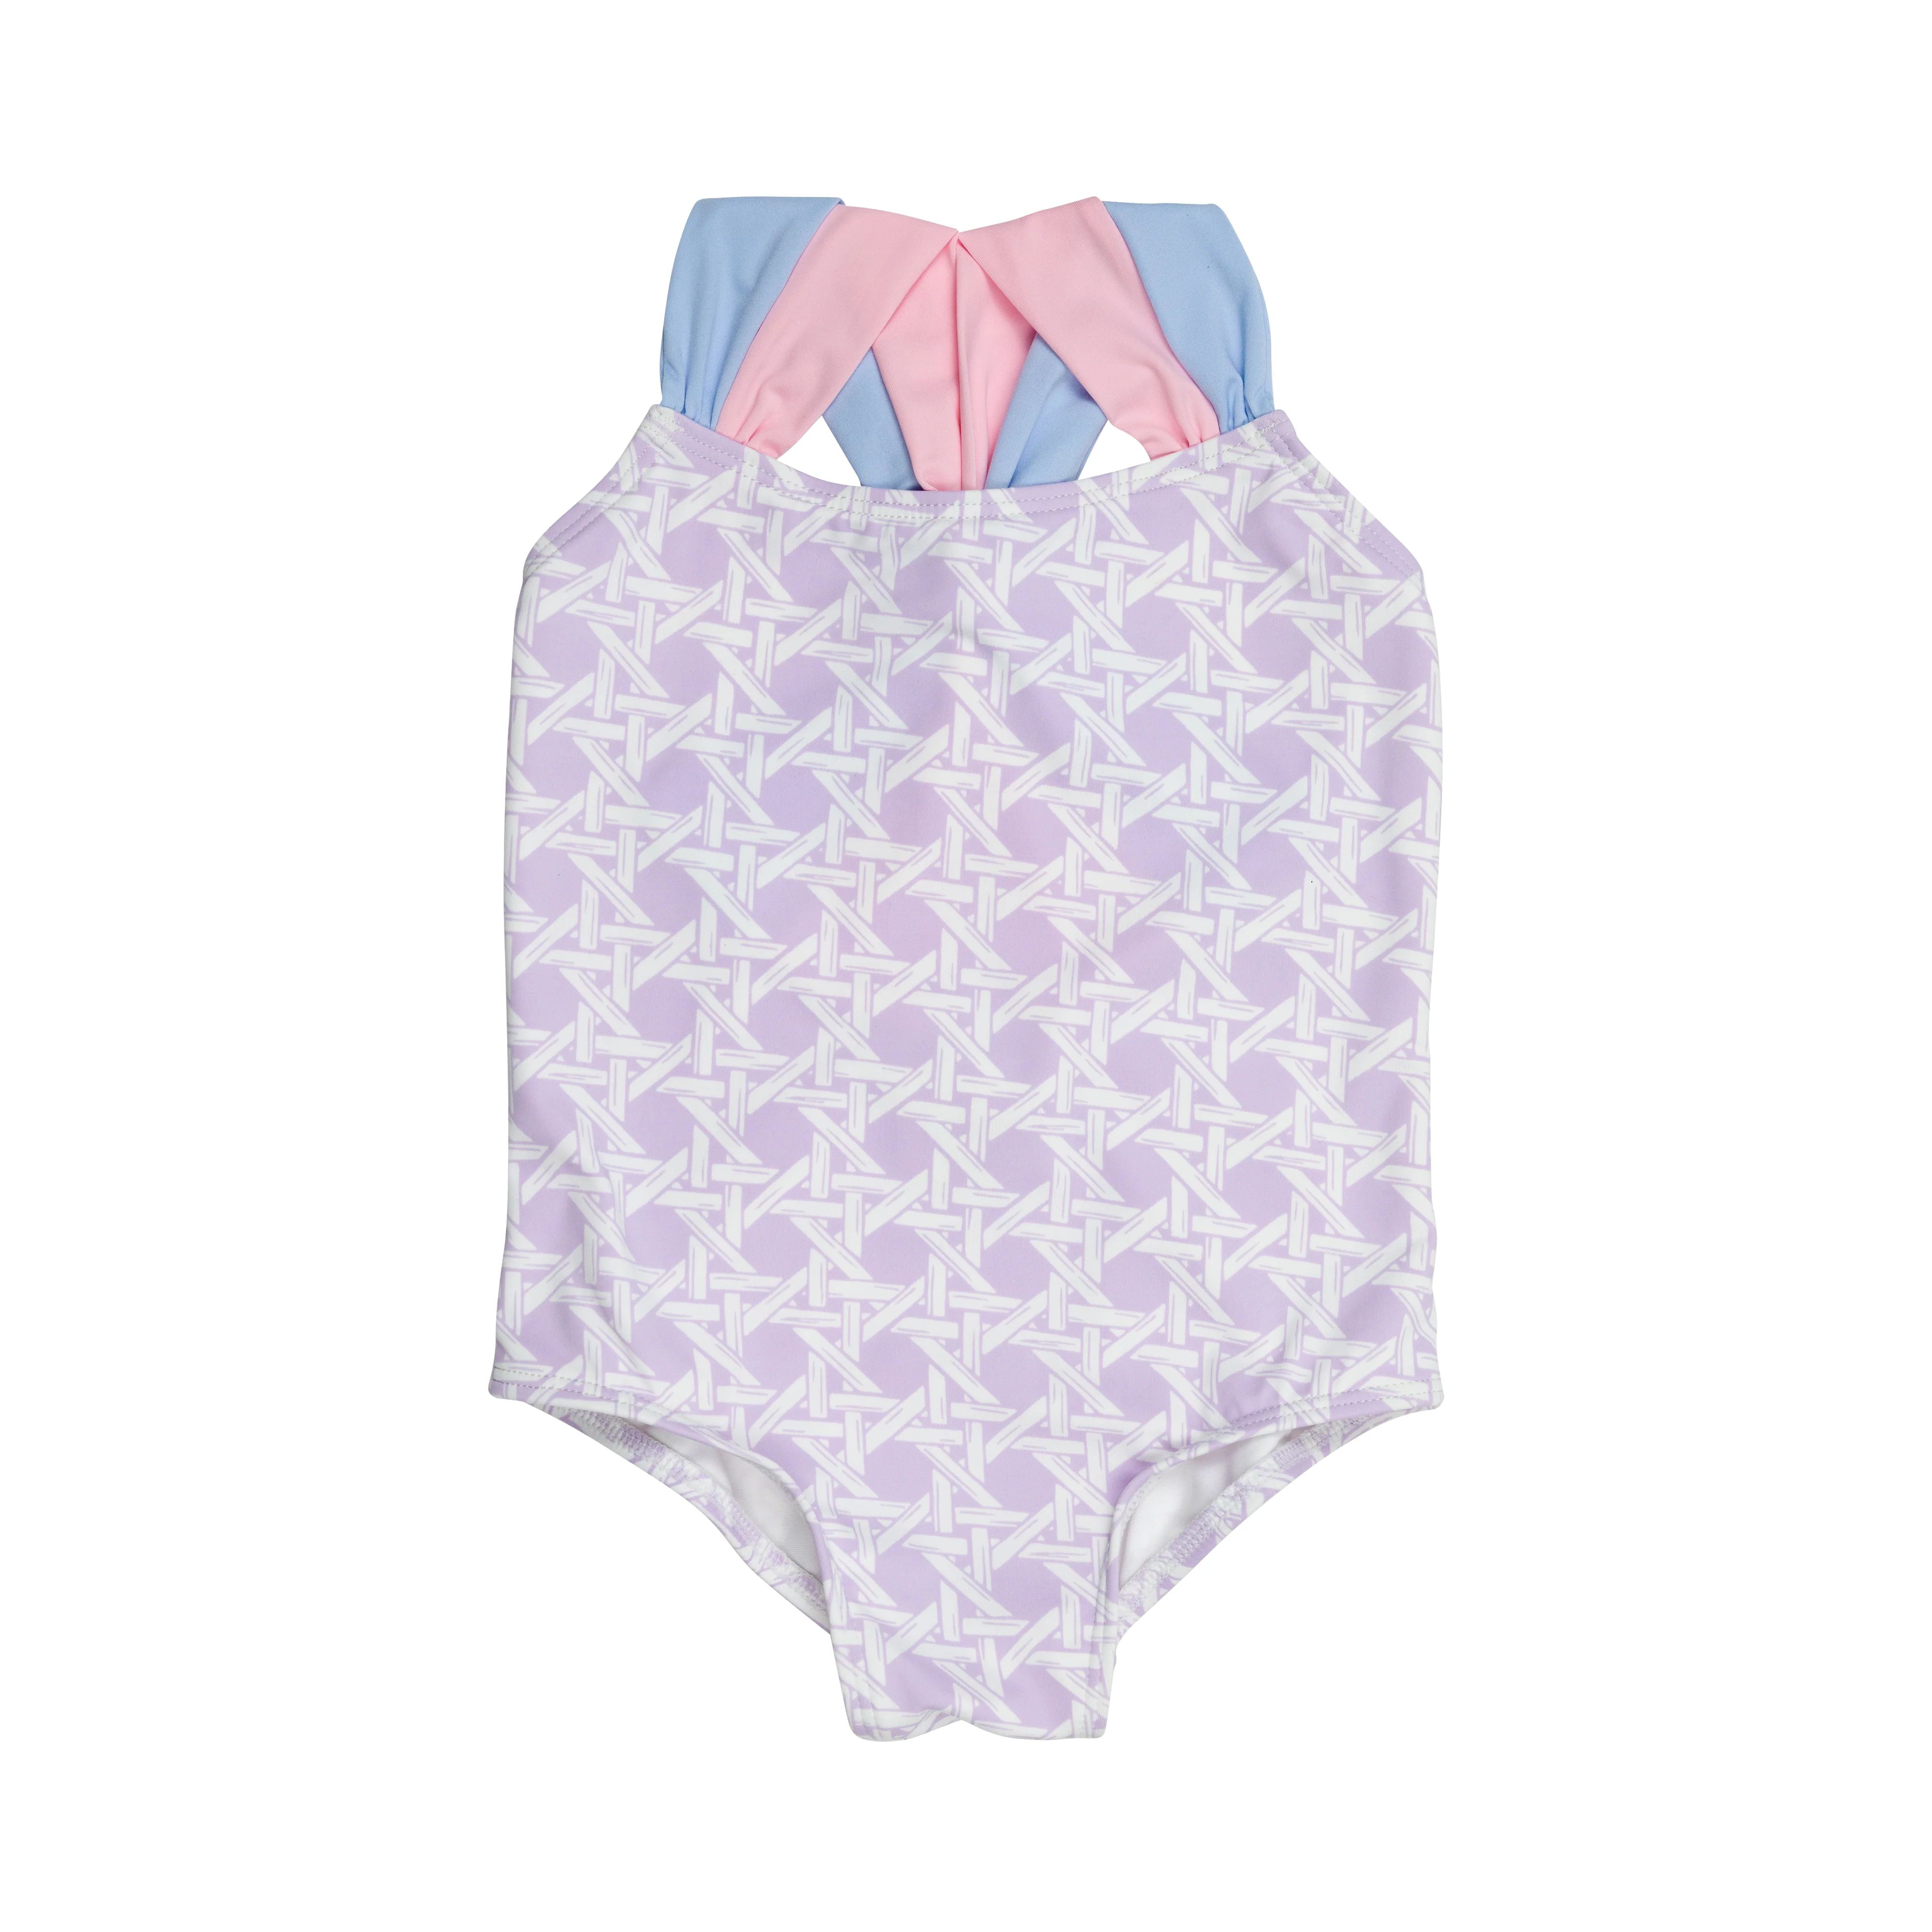 Seabrook Bathing Suit - Ocean Club Cane with Beale Street Blue & Palm Beach Pink | The Beaufort Bonnet Company